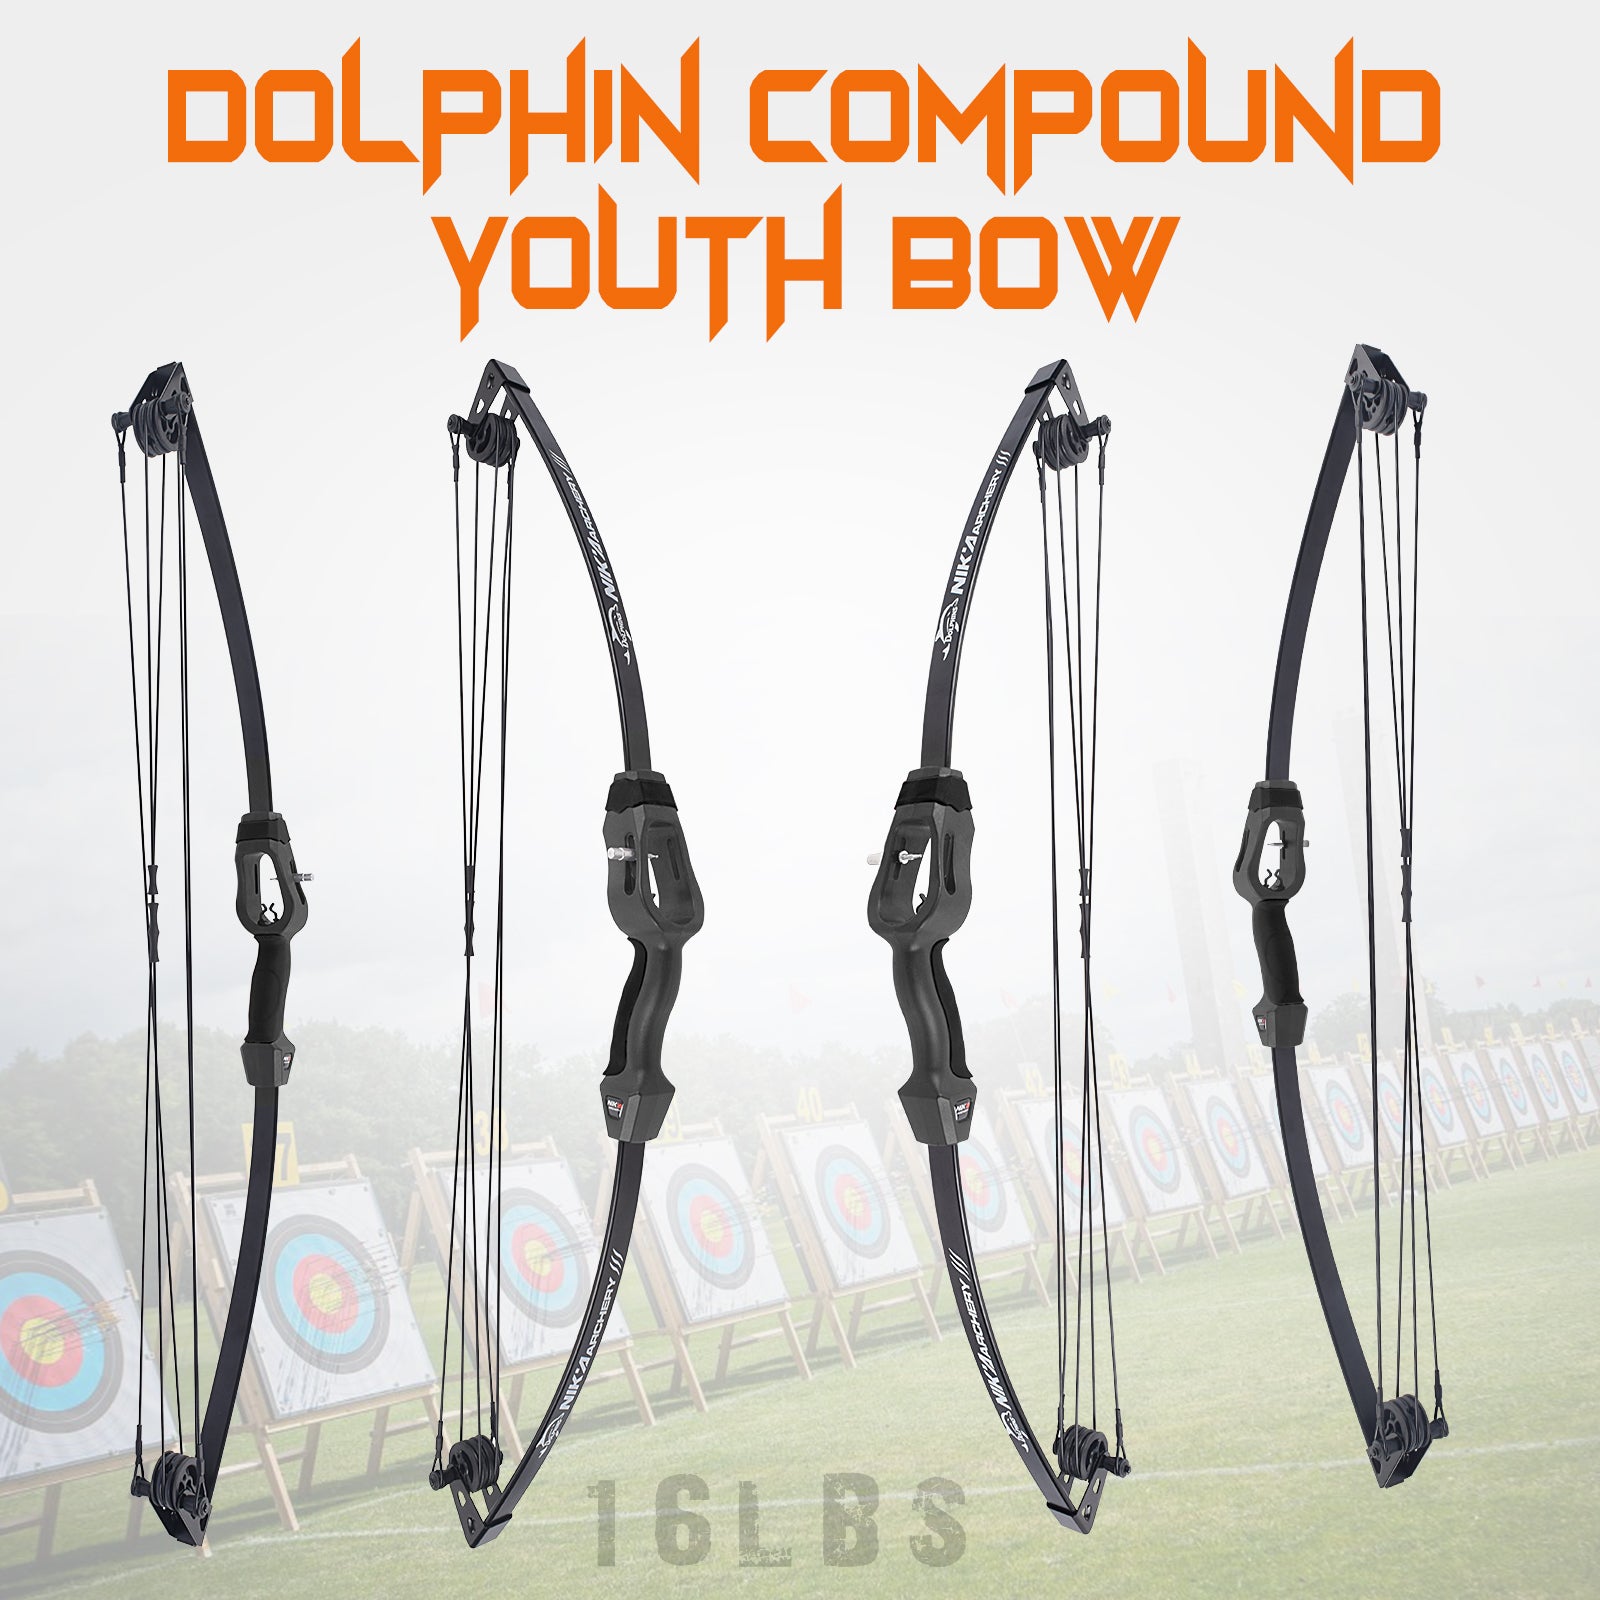 16LBS Compound Bow and Arrow Set Outdoor for Youth Children Junior Archery Beginner